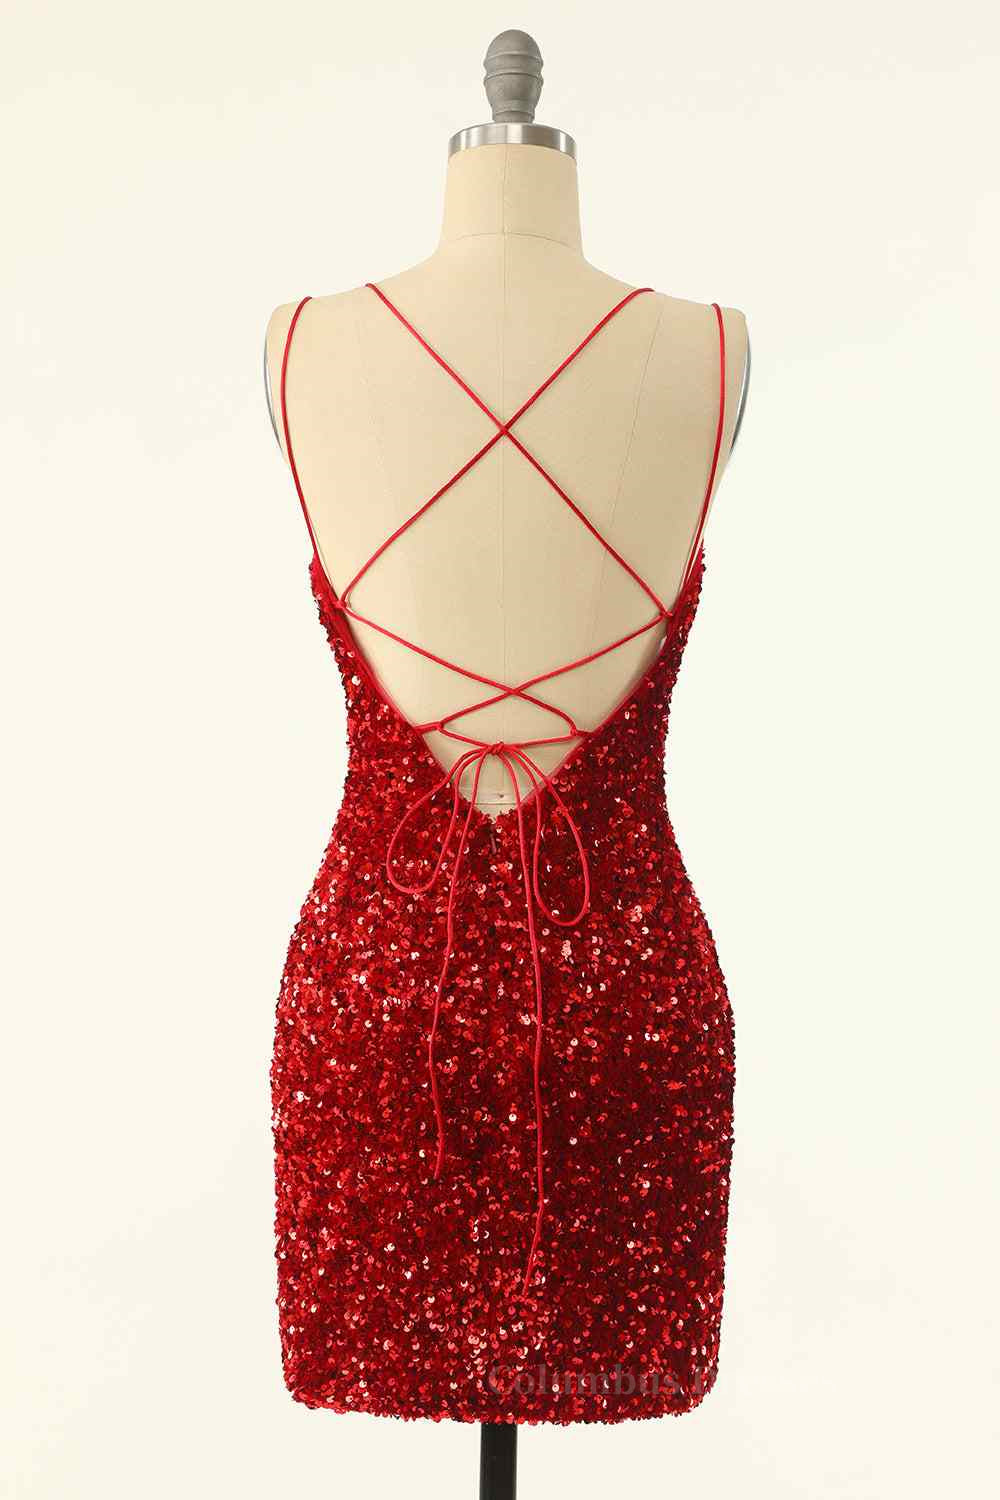 Party Dress For Cocktail, Red Sheath Double Straps Lace-Up Back Sequins Mini Homecoming Dress